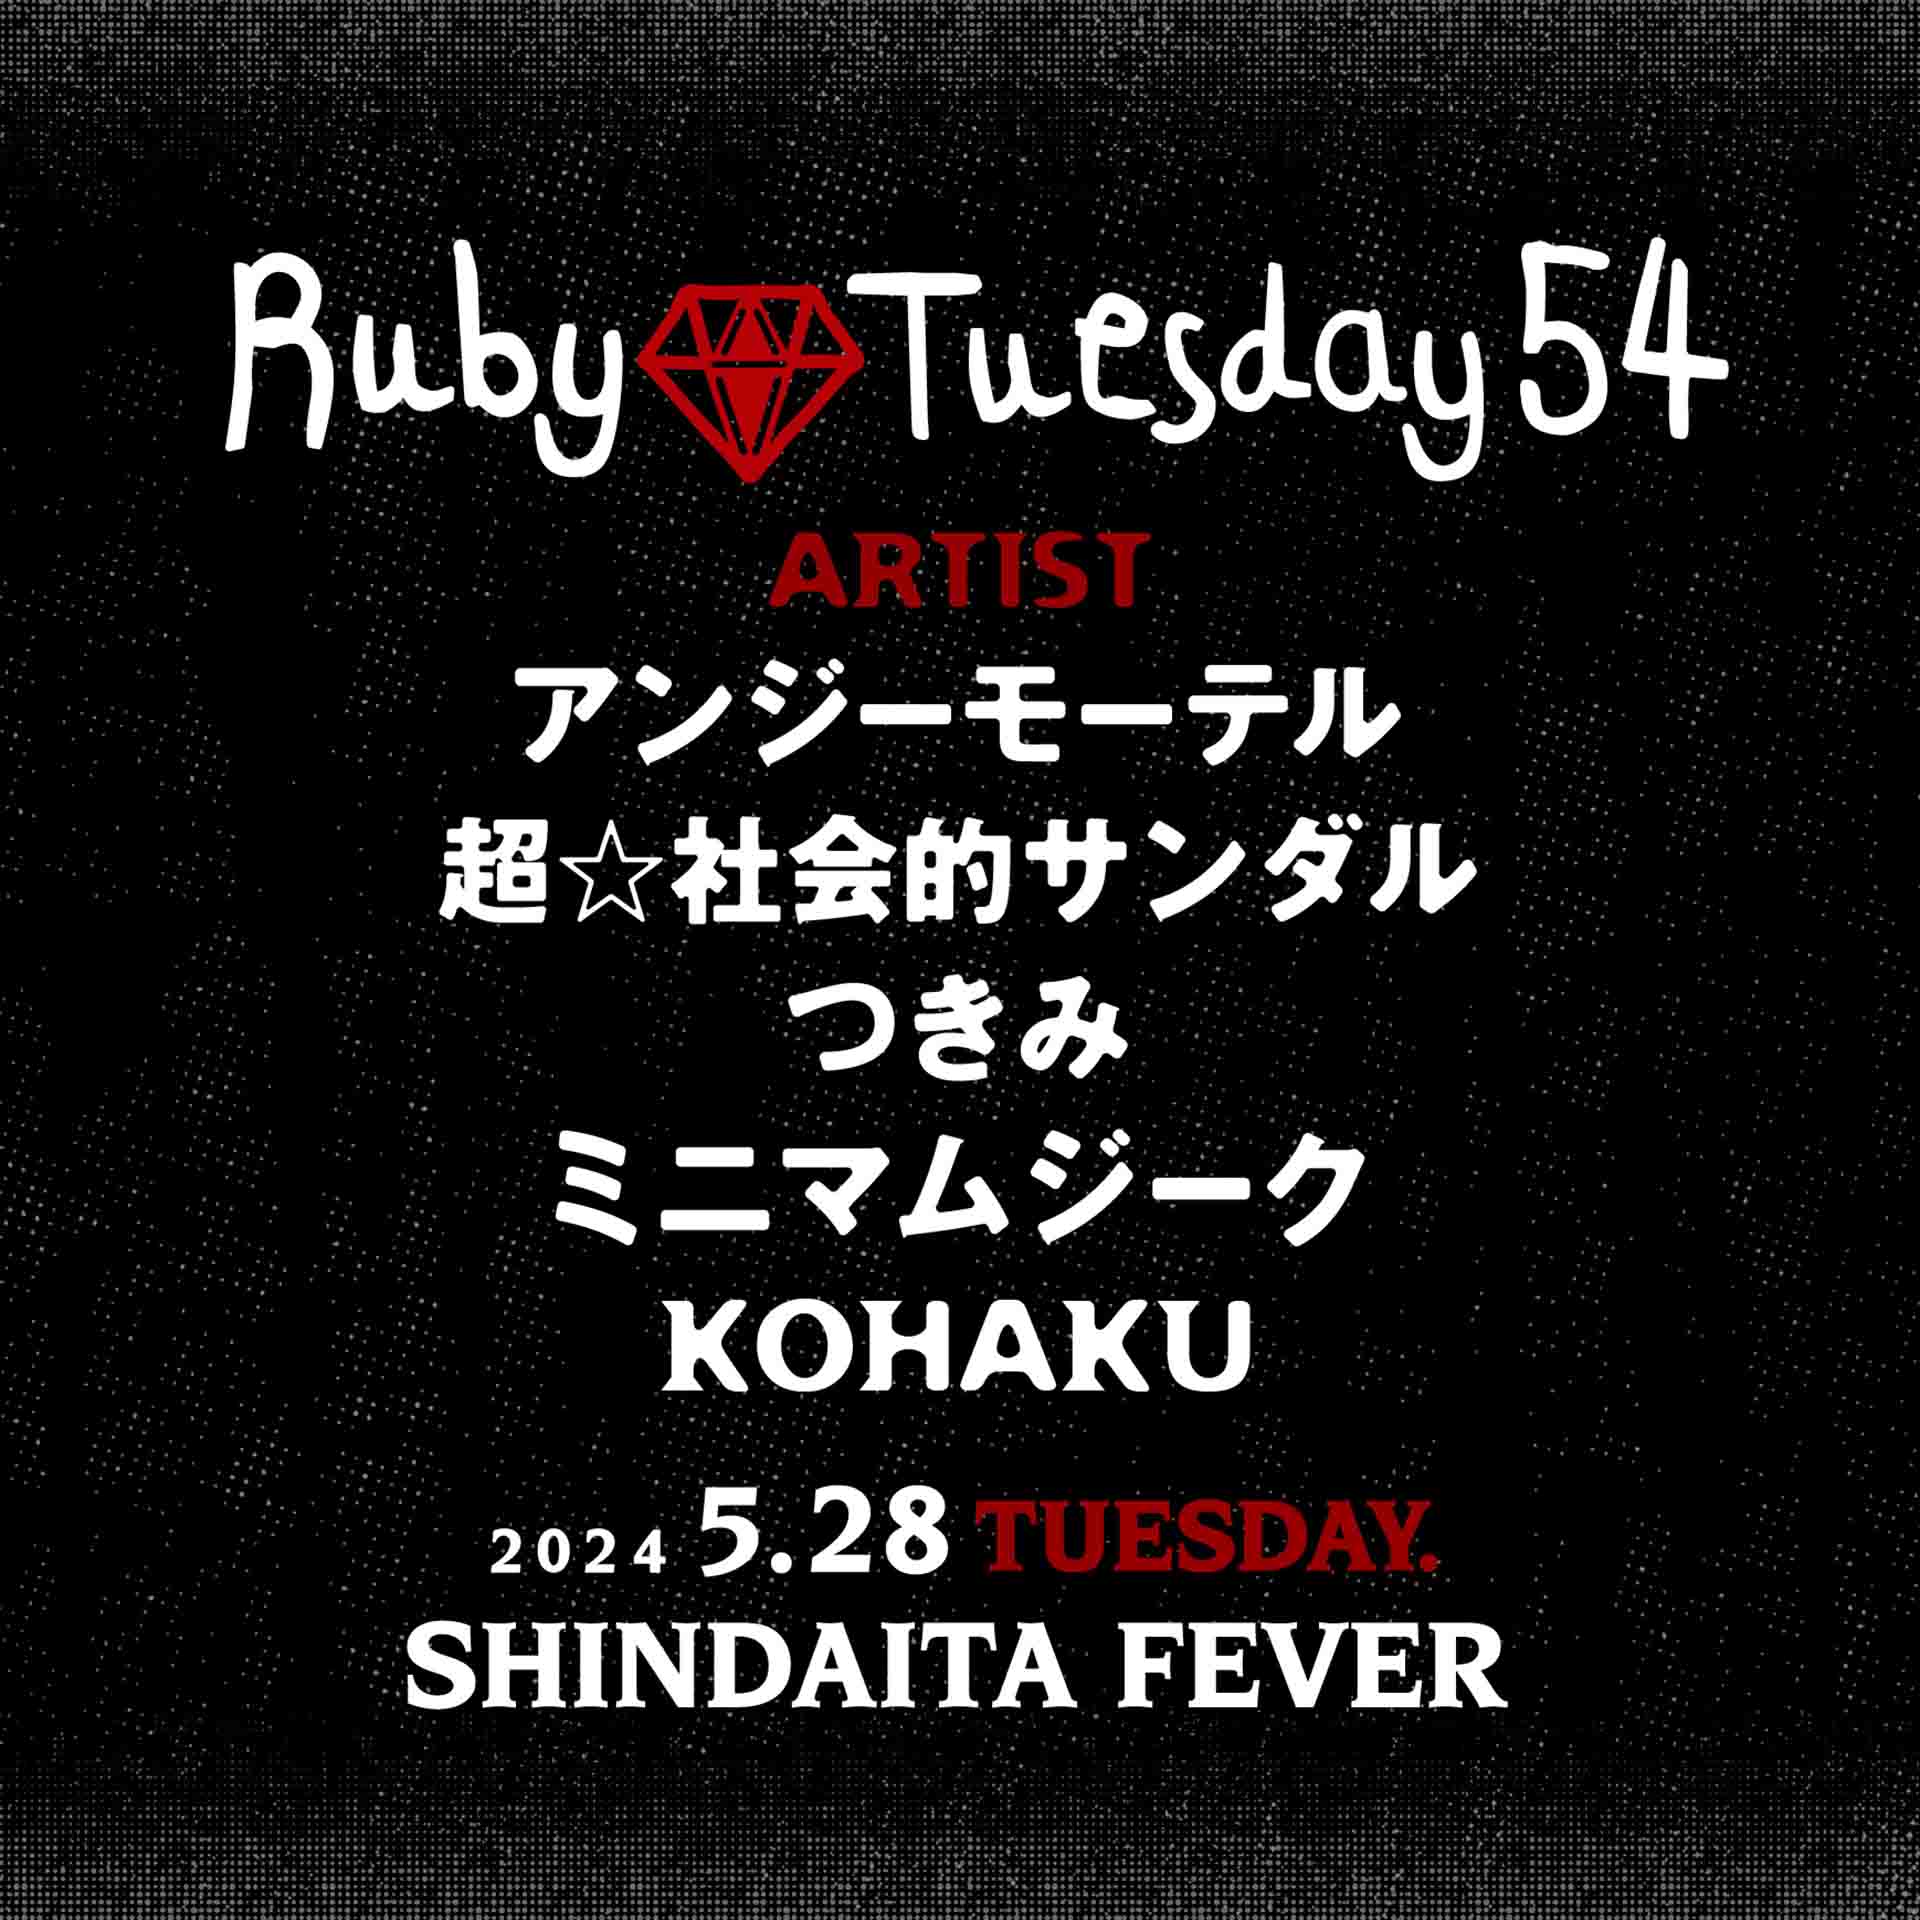 Ruby Tuesday 54